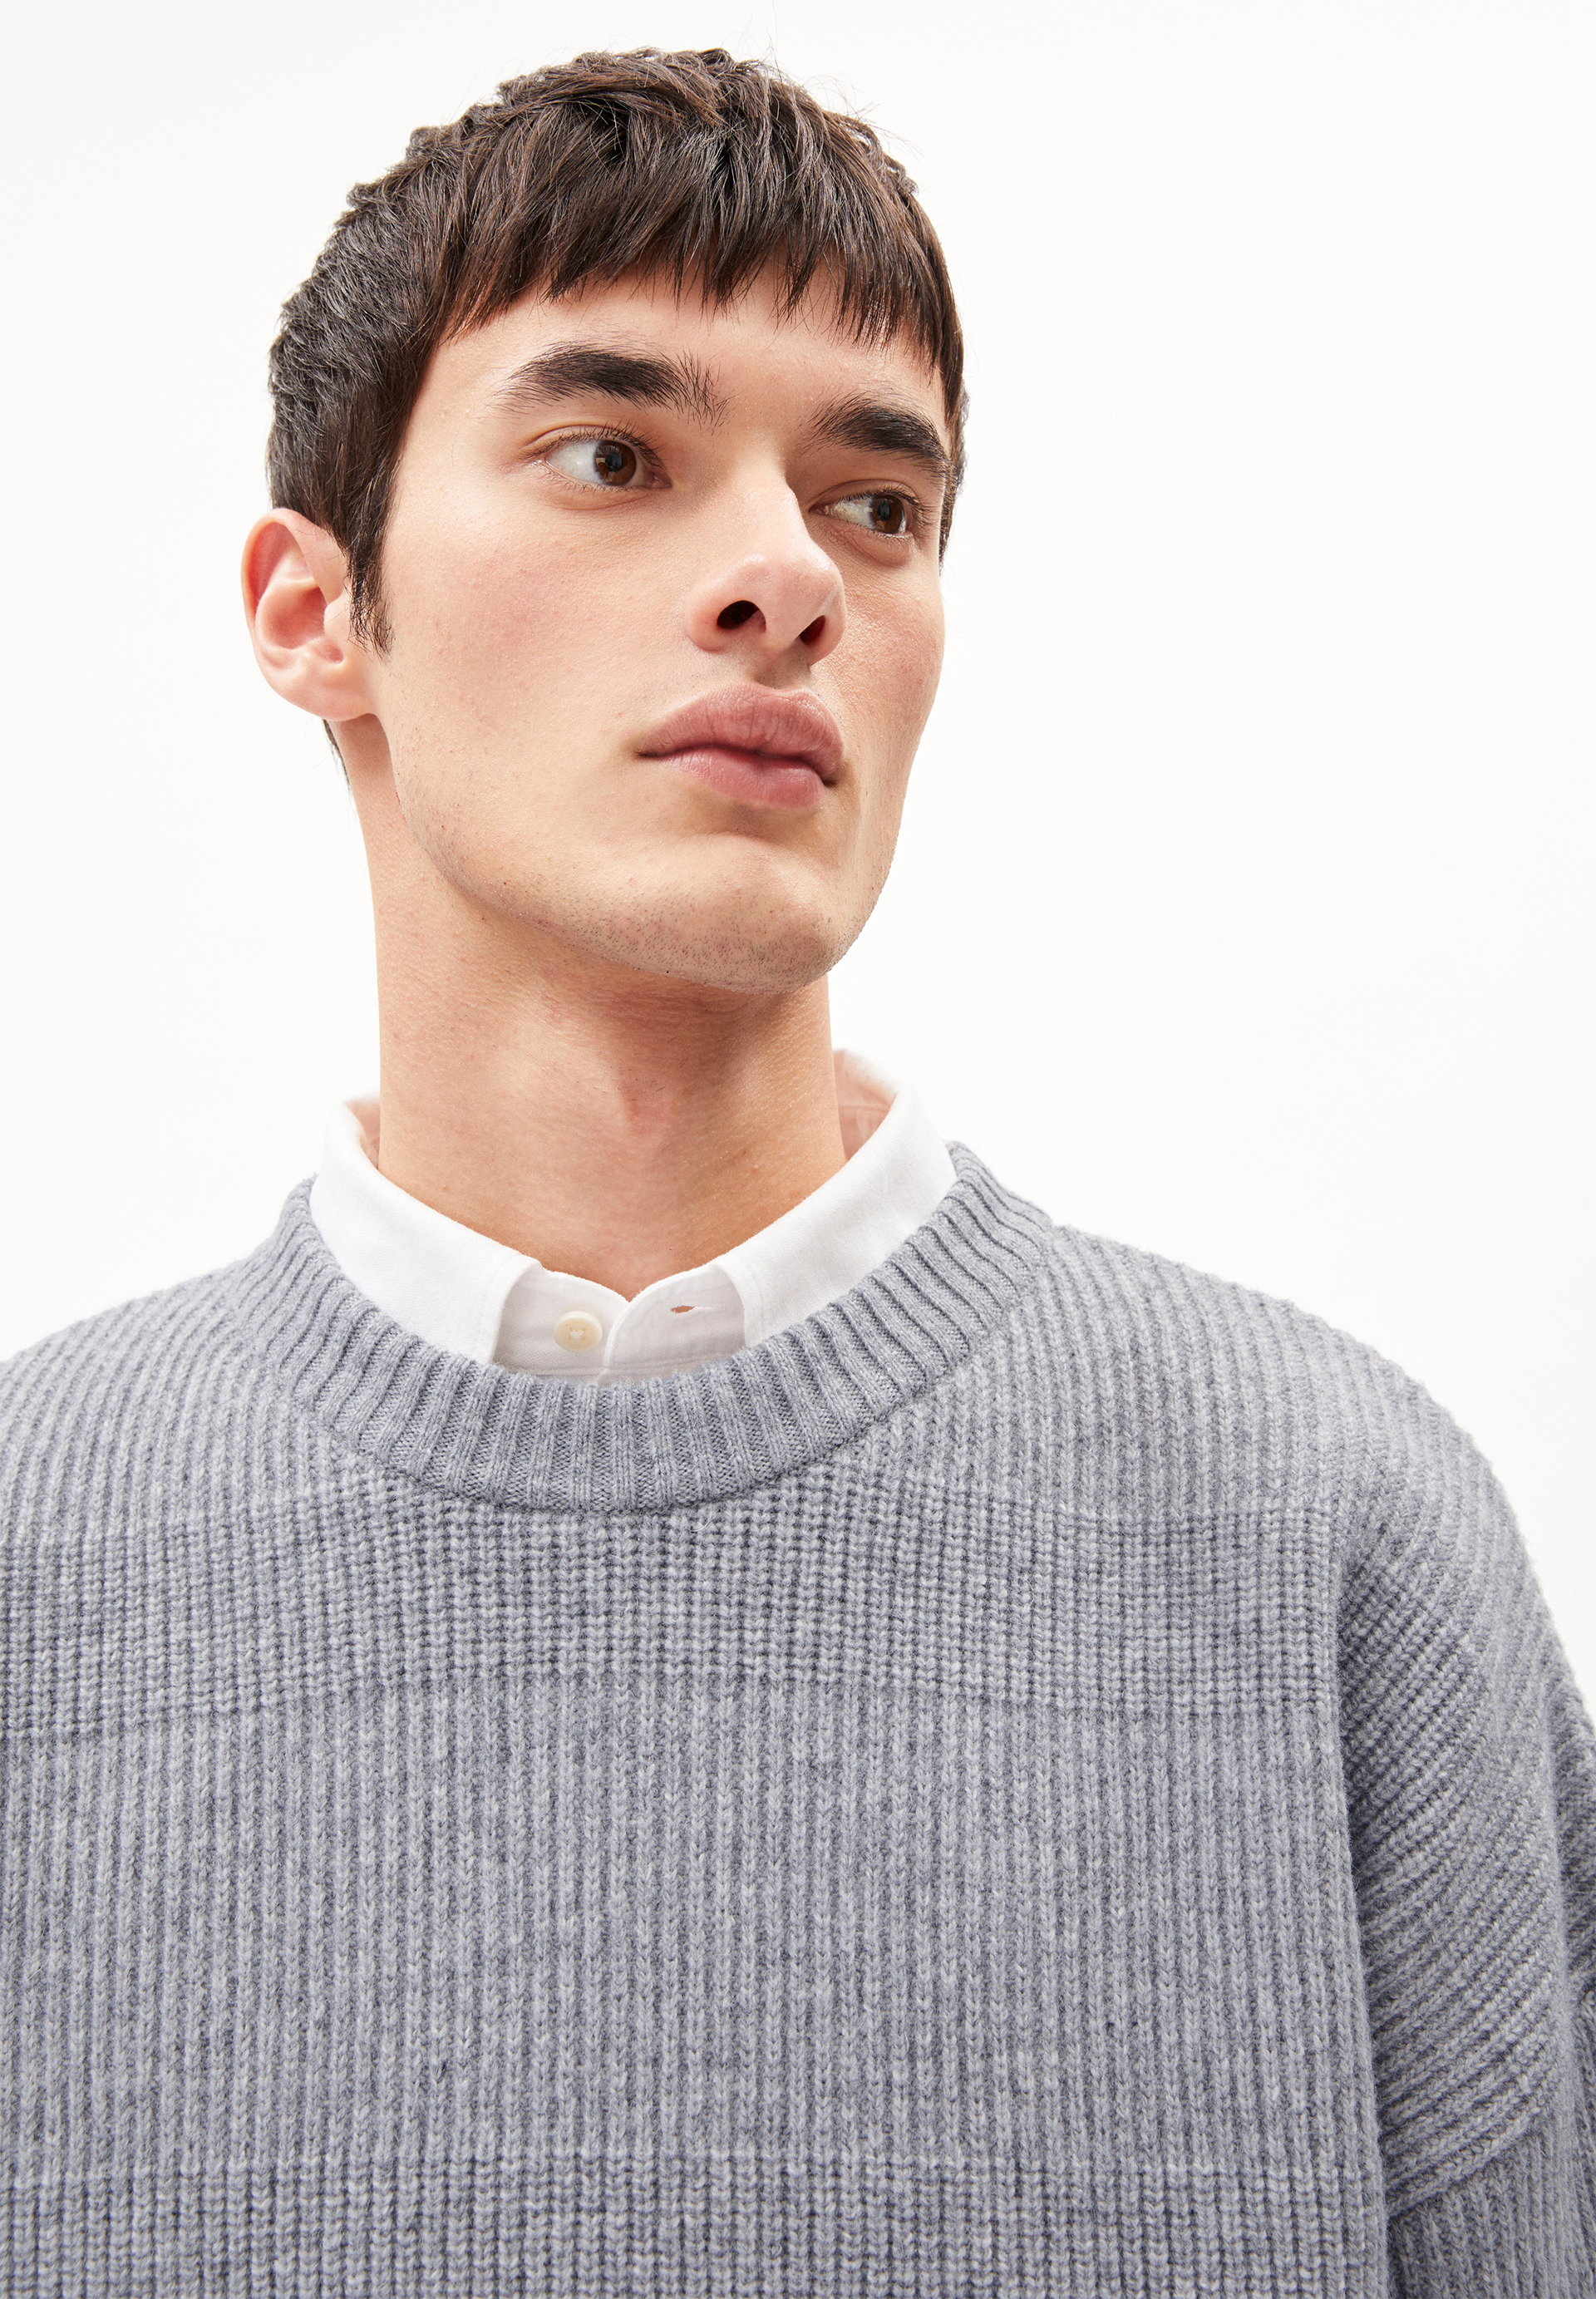 VISKAANO Sweater Relaxed Fit made of Organic Wool Mix